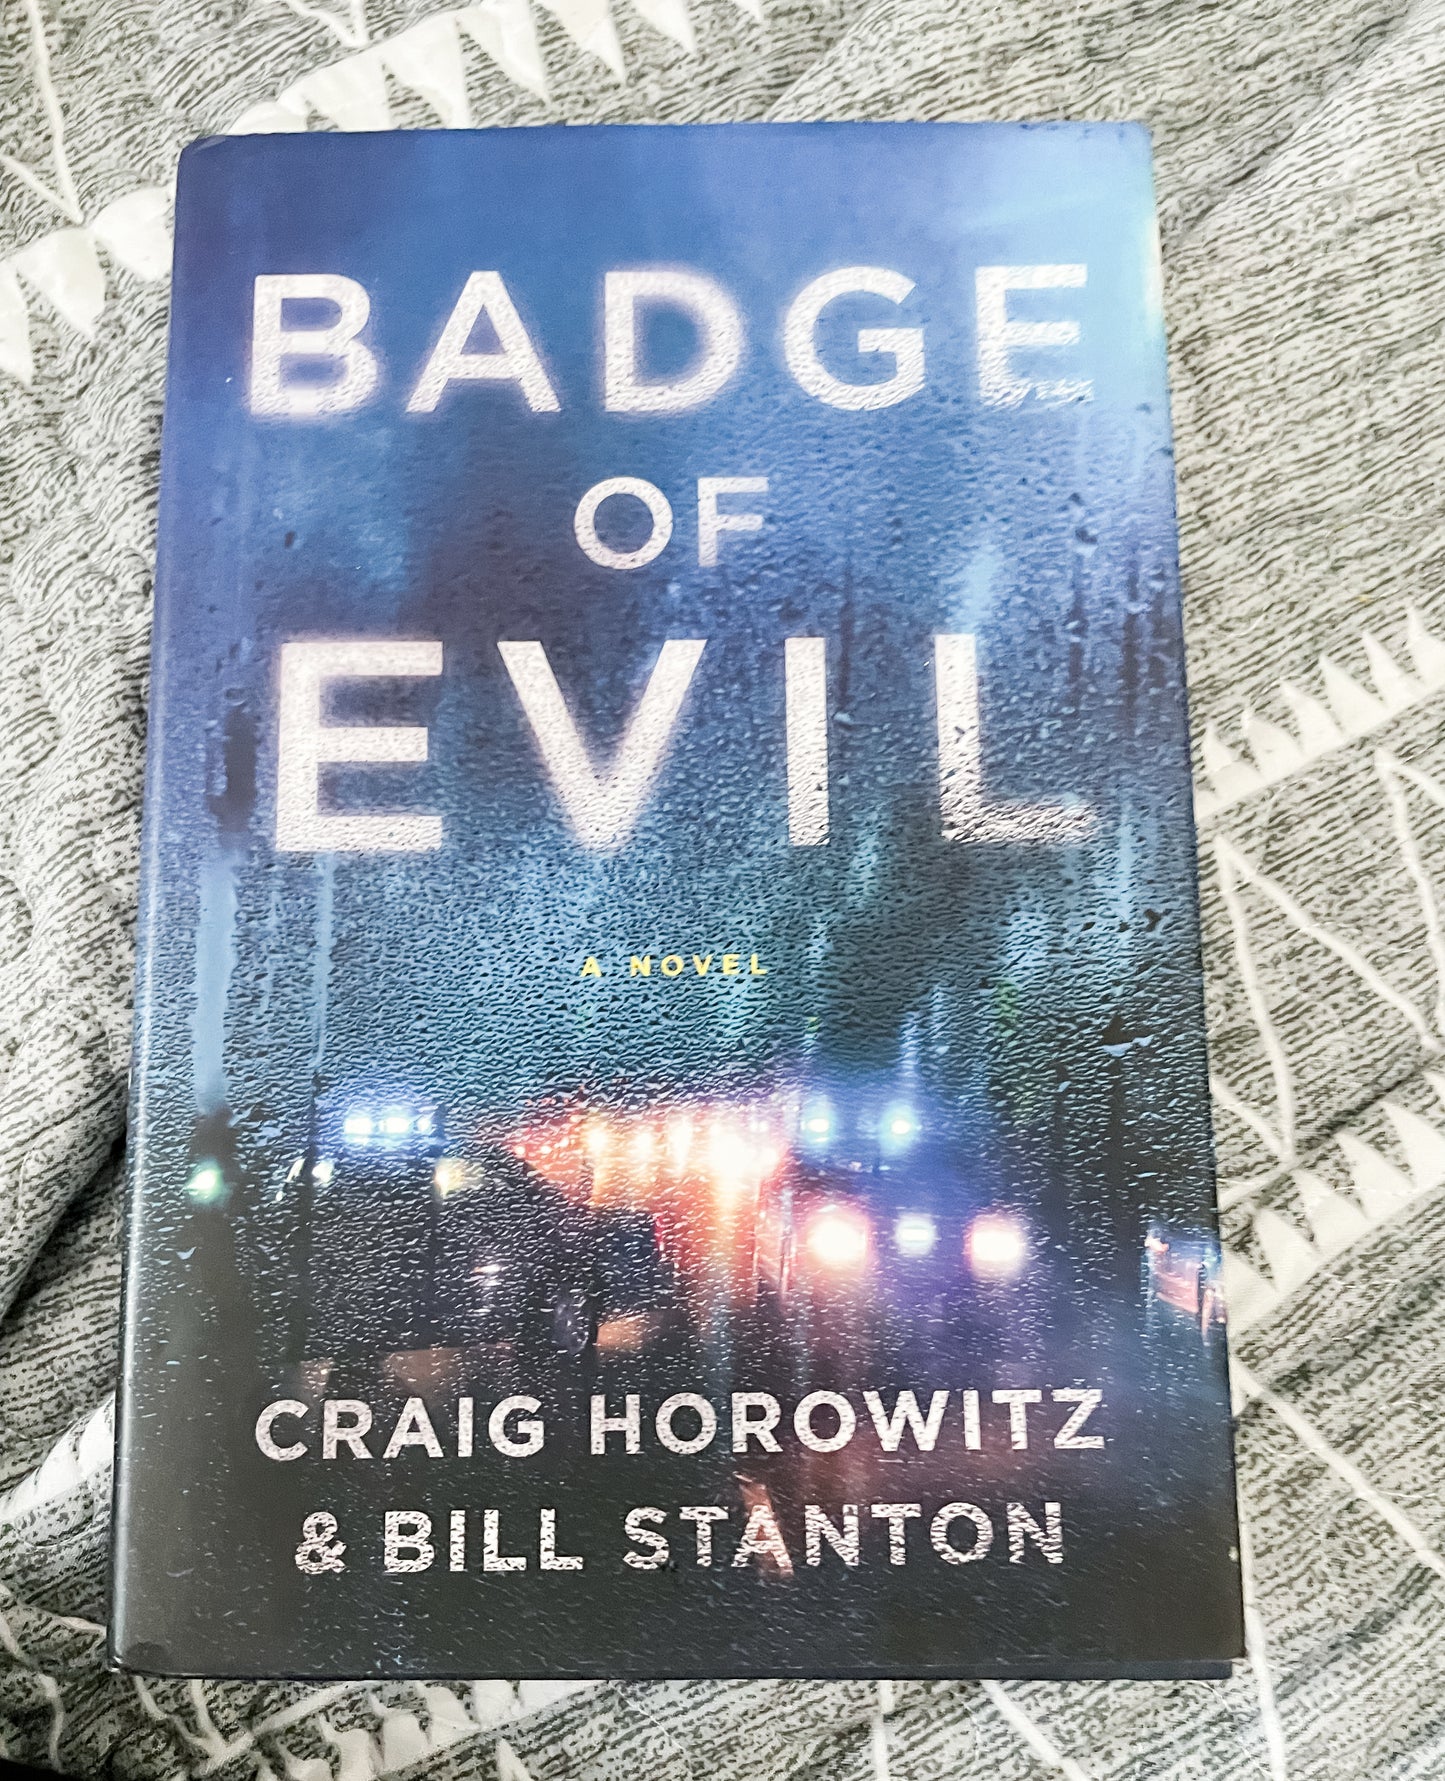 Badge of Evil by Craig Horowitz and Bill Stanton